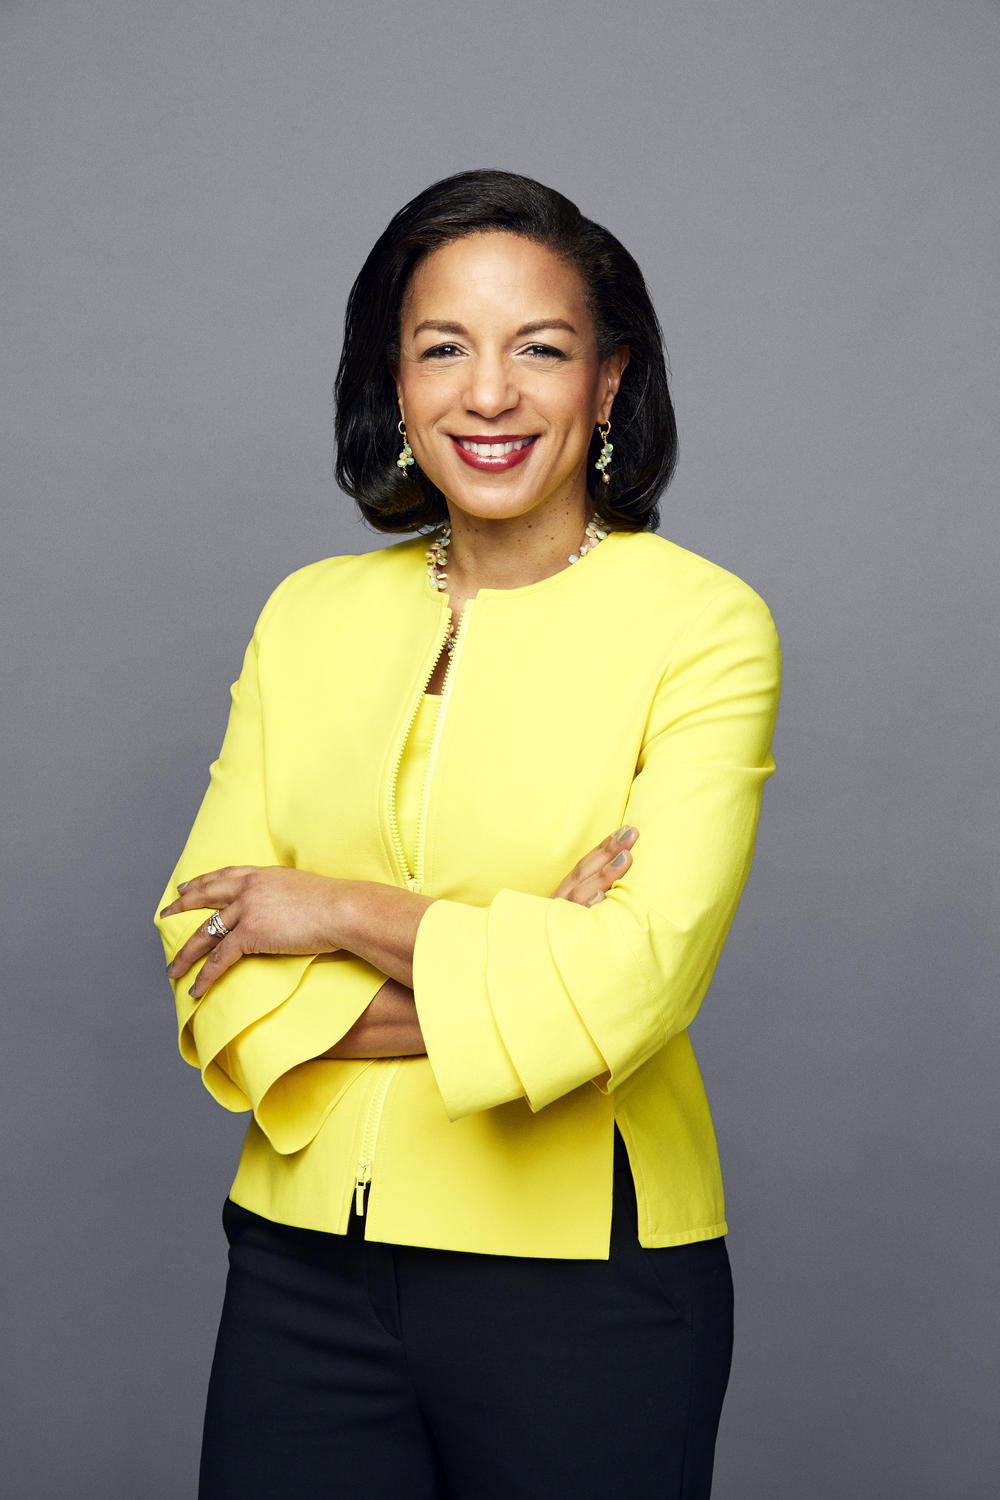 Susan Rice has served as U.S. Ambassador to the U.N. and as President Barack Obama's National Security Advisor. Now, she's author of a new autobiography called "Tough Love: My Story of the Things Worth Fighting For."